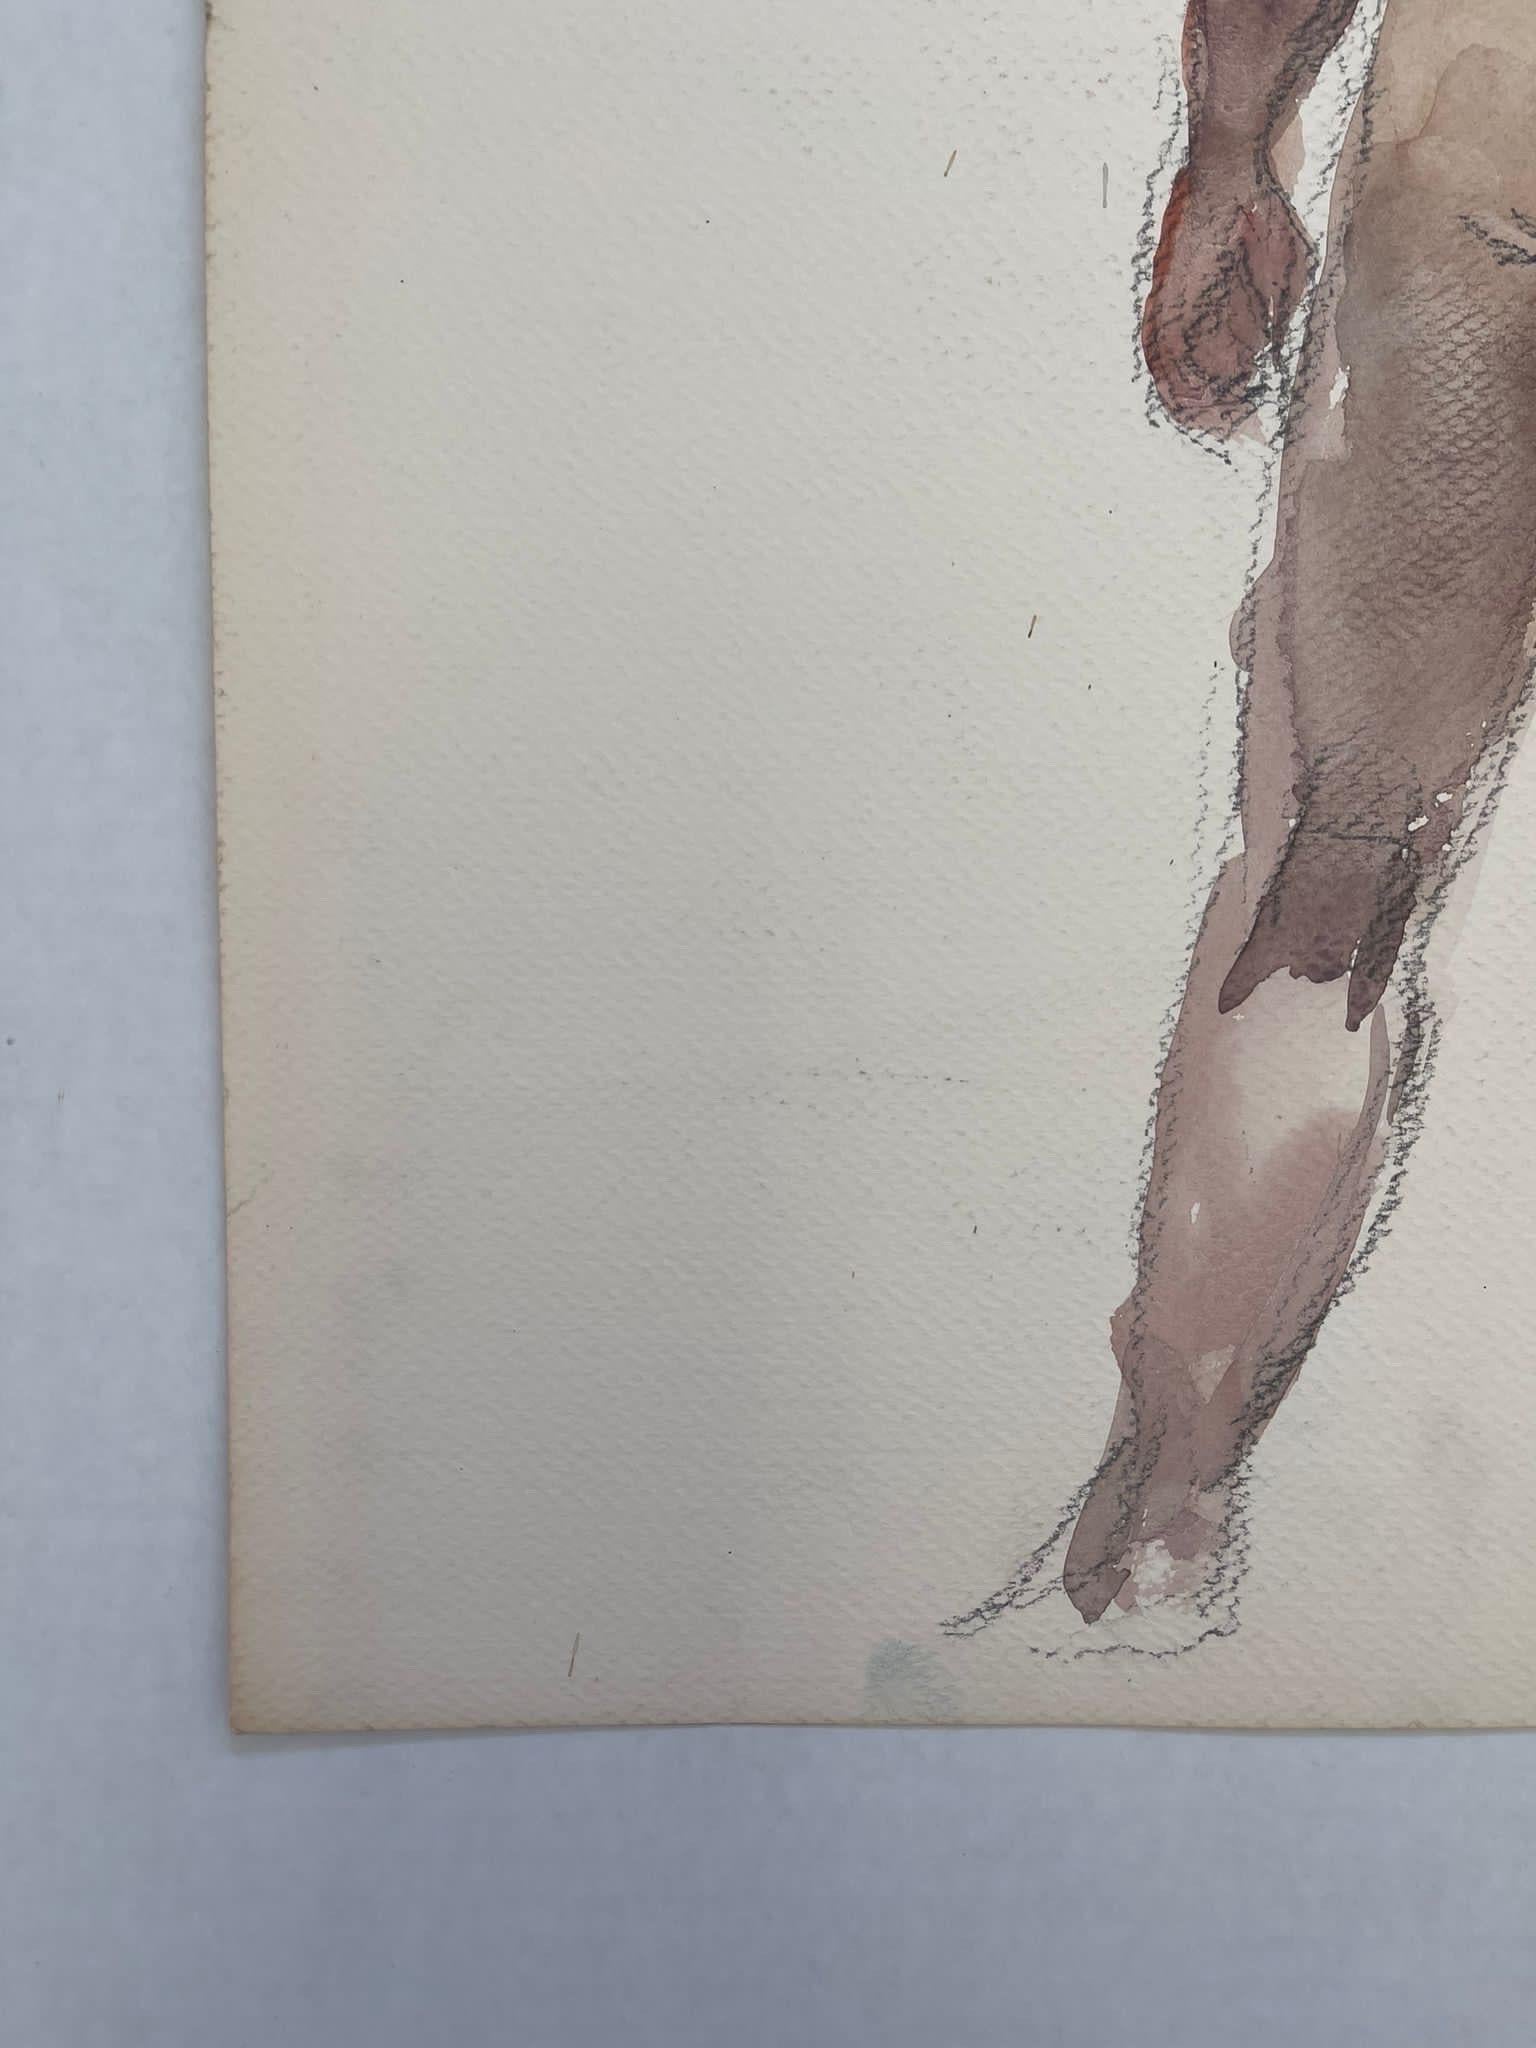 Late 20th Century Vintage Nude Male Portrait on Paper.